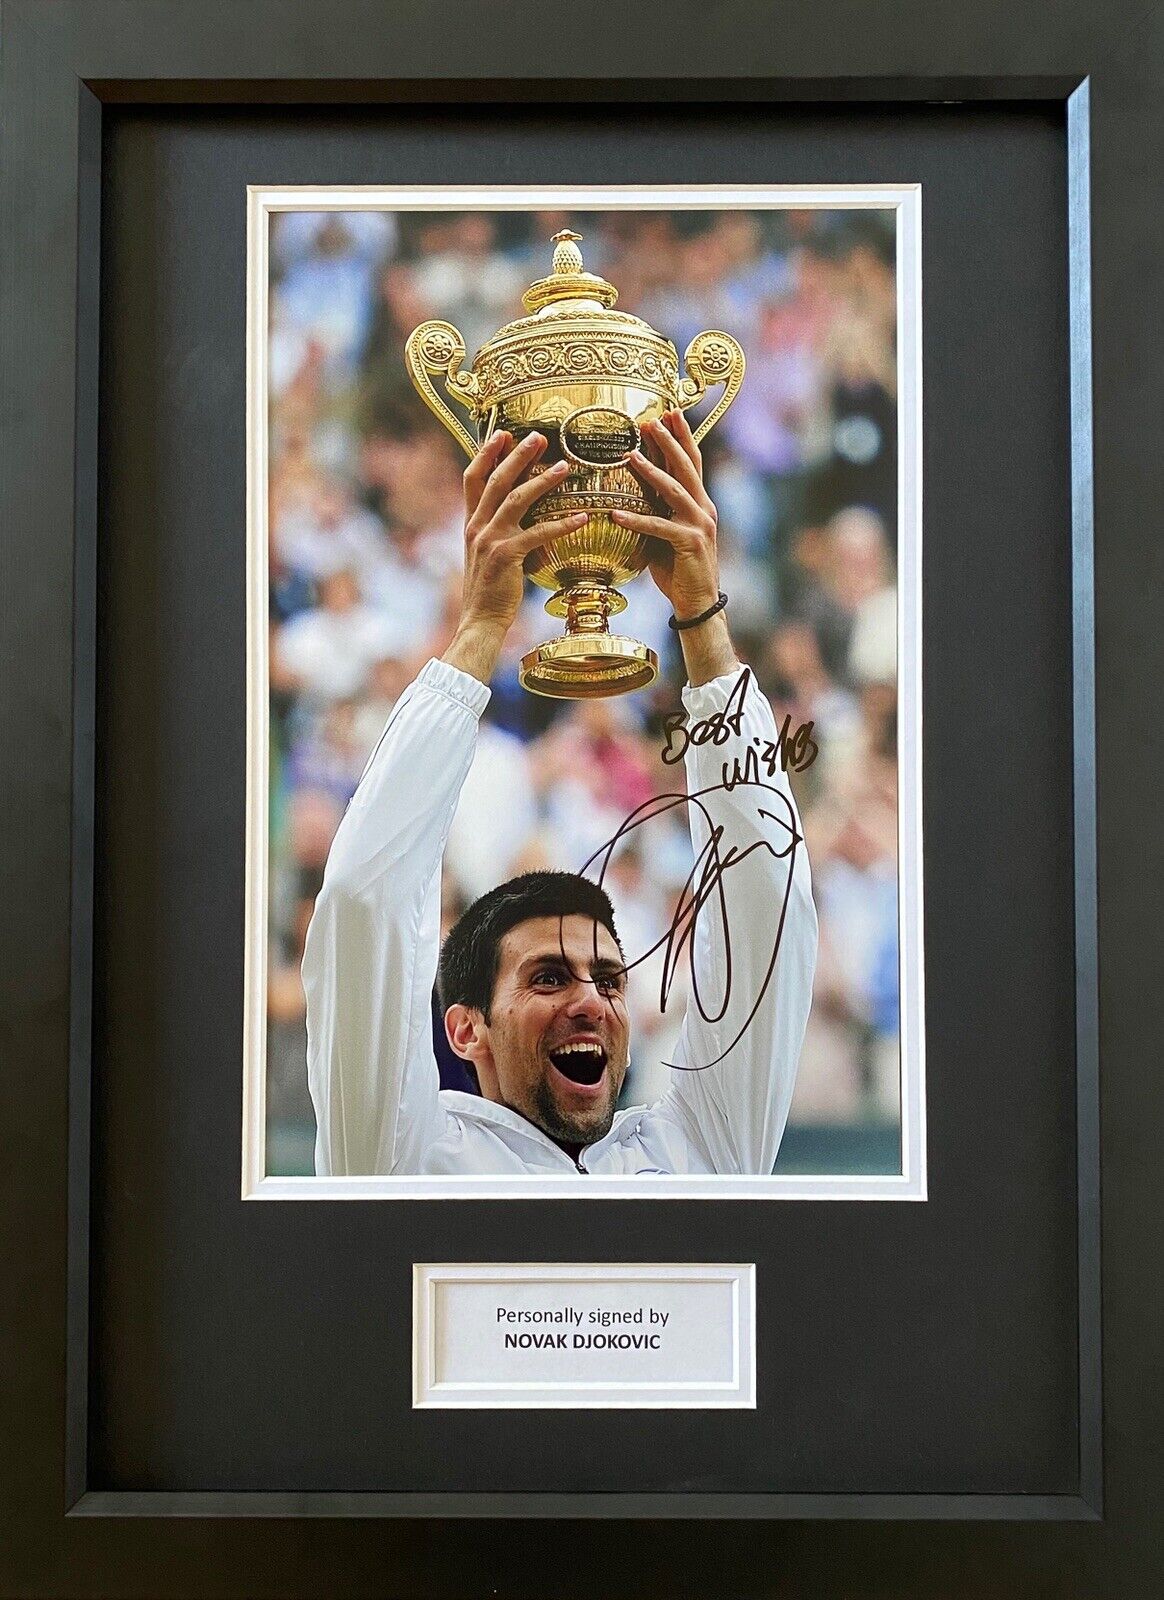 Novak Djokovic Genuine Hand Signed Tennis Photo Poster painting In A3 Wooden Frame - View Proof